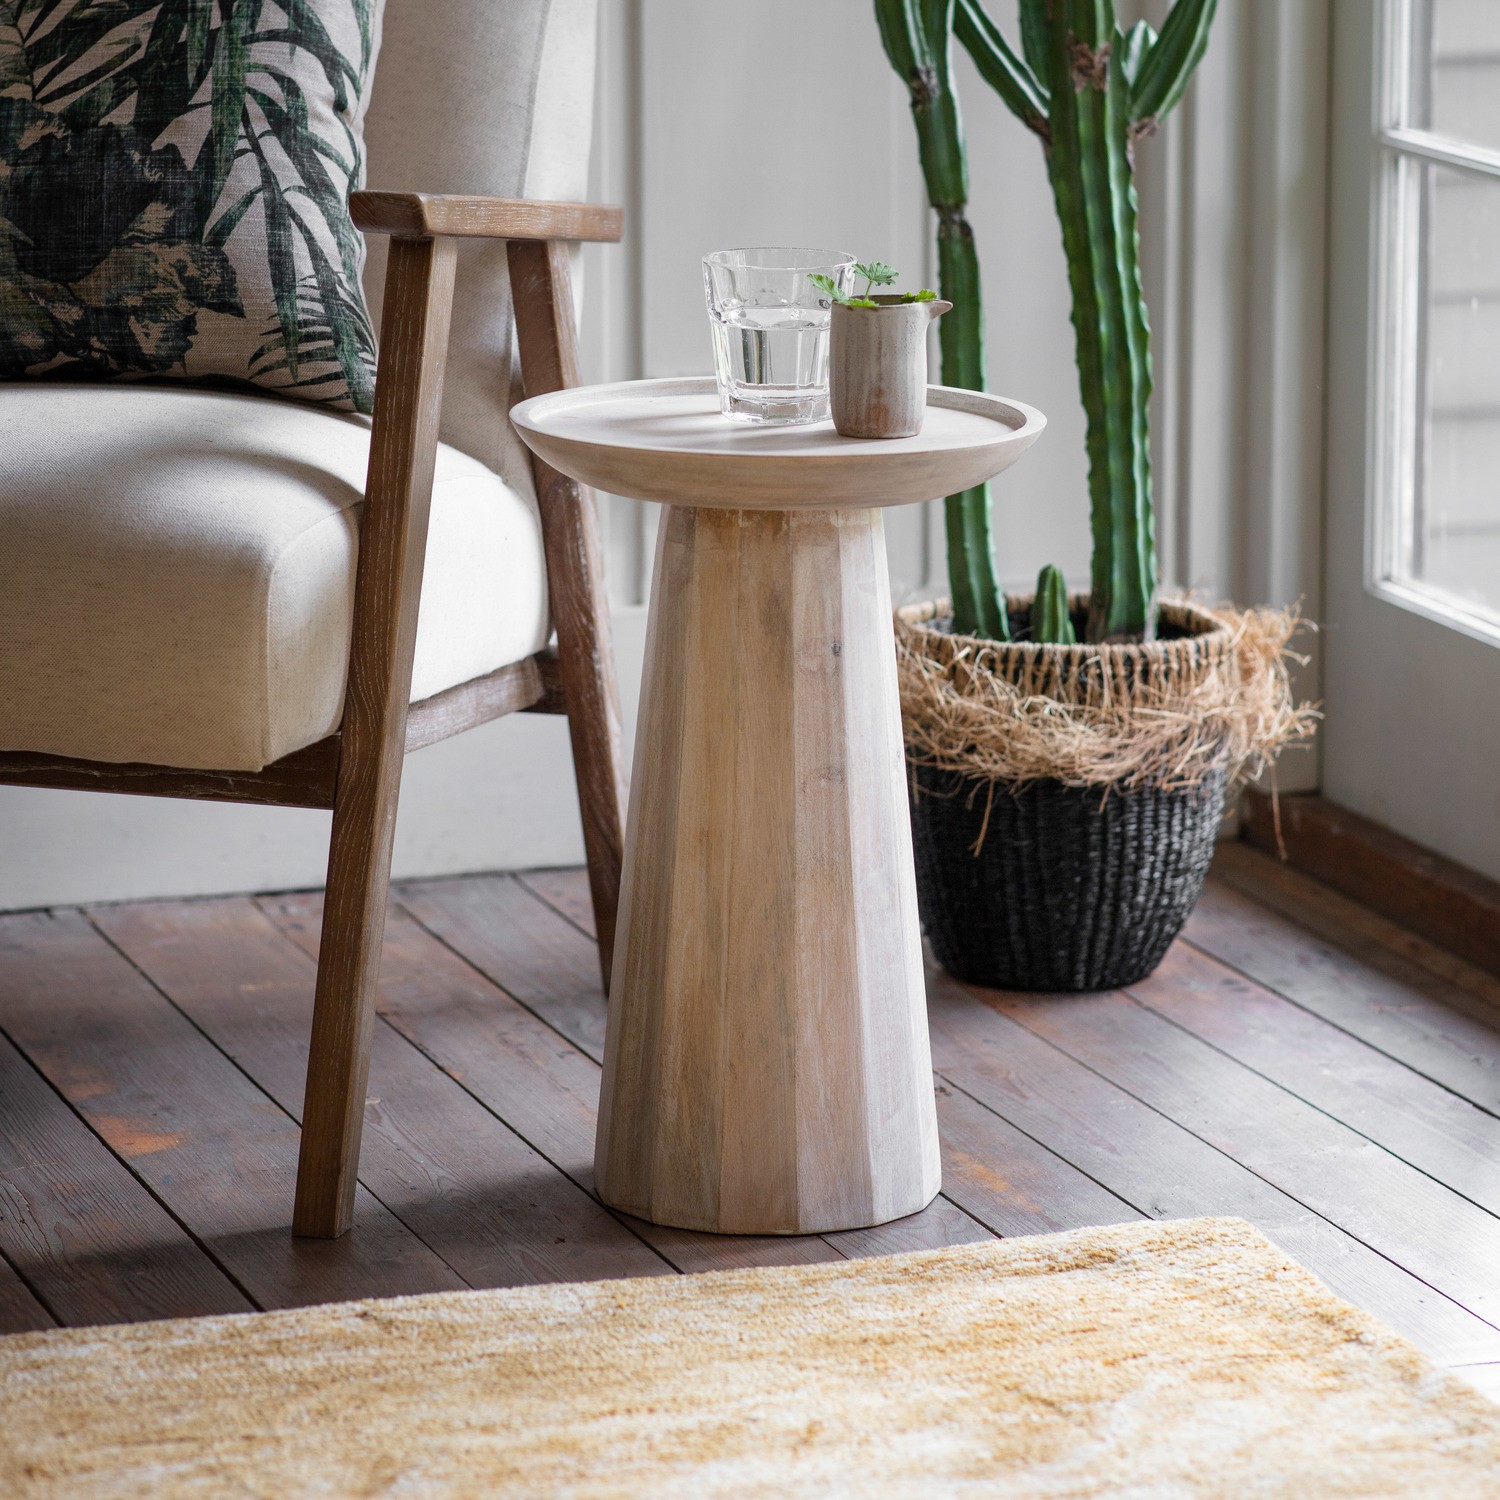 Photo of Solid wood side table with white wash finish - caspian house